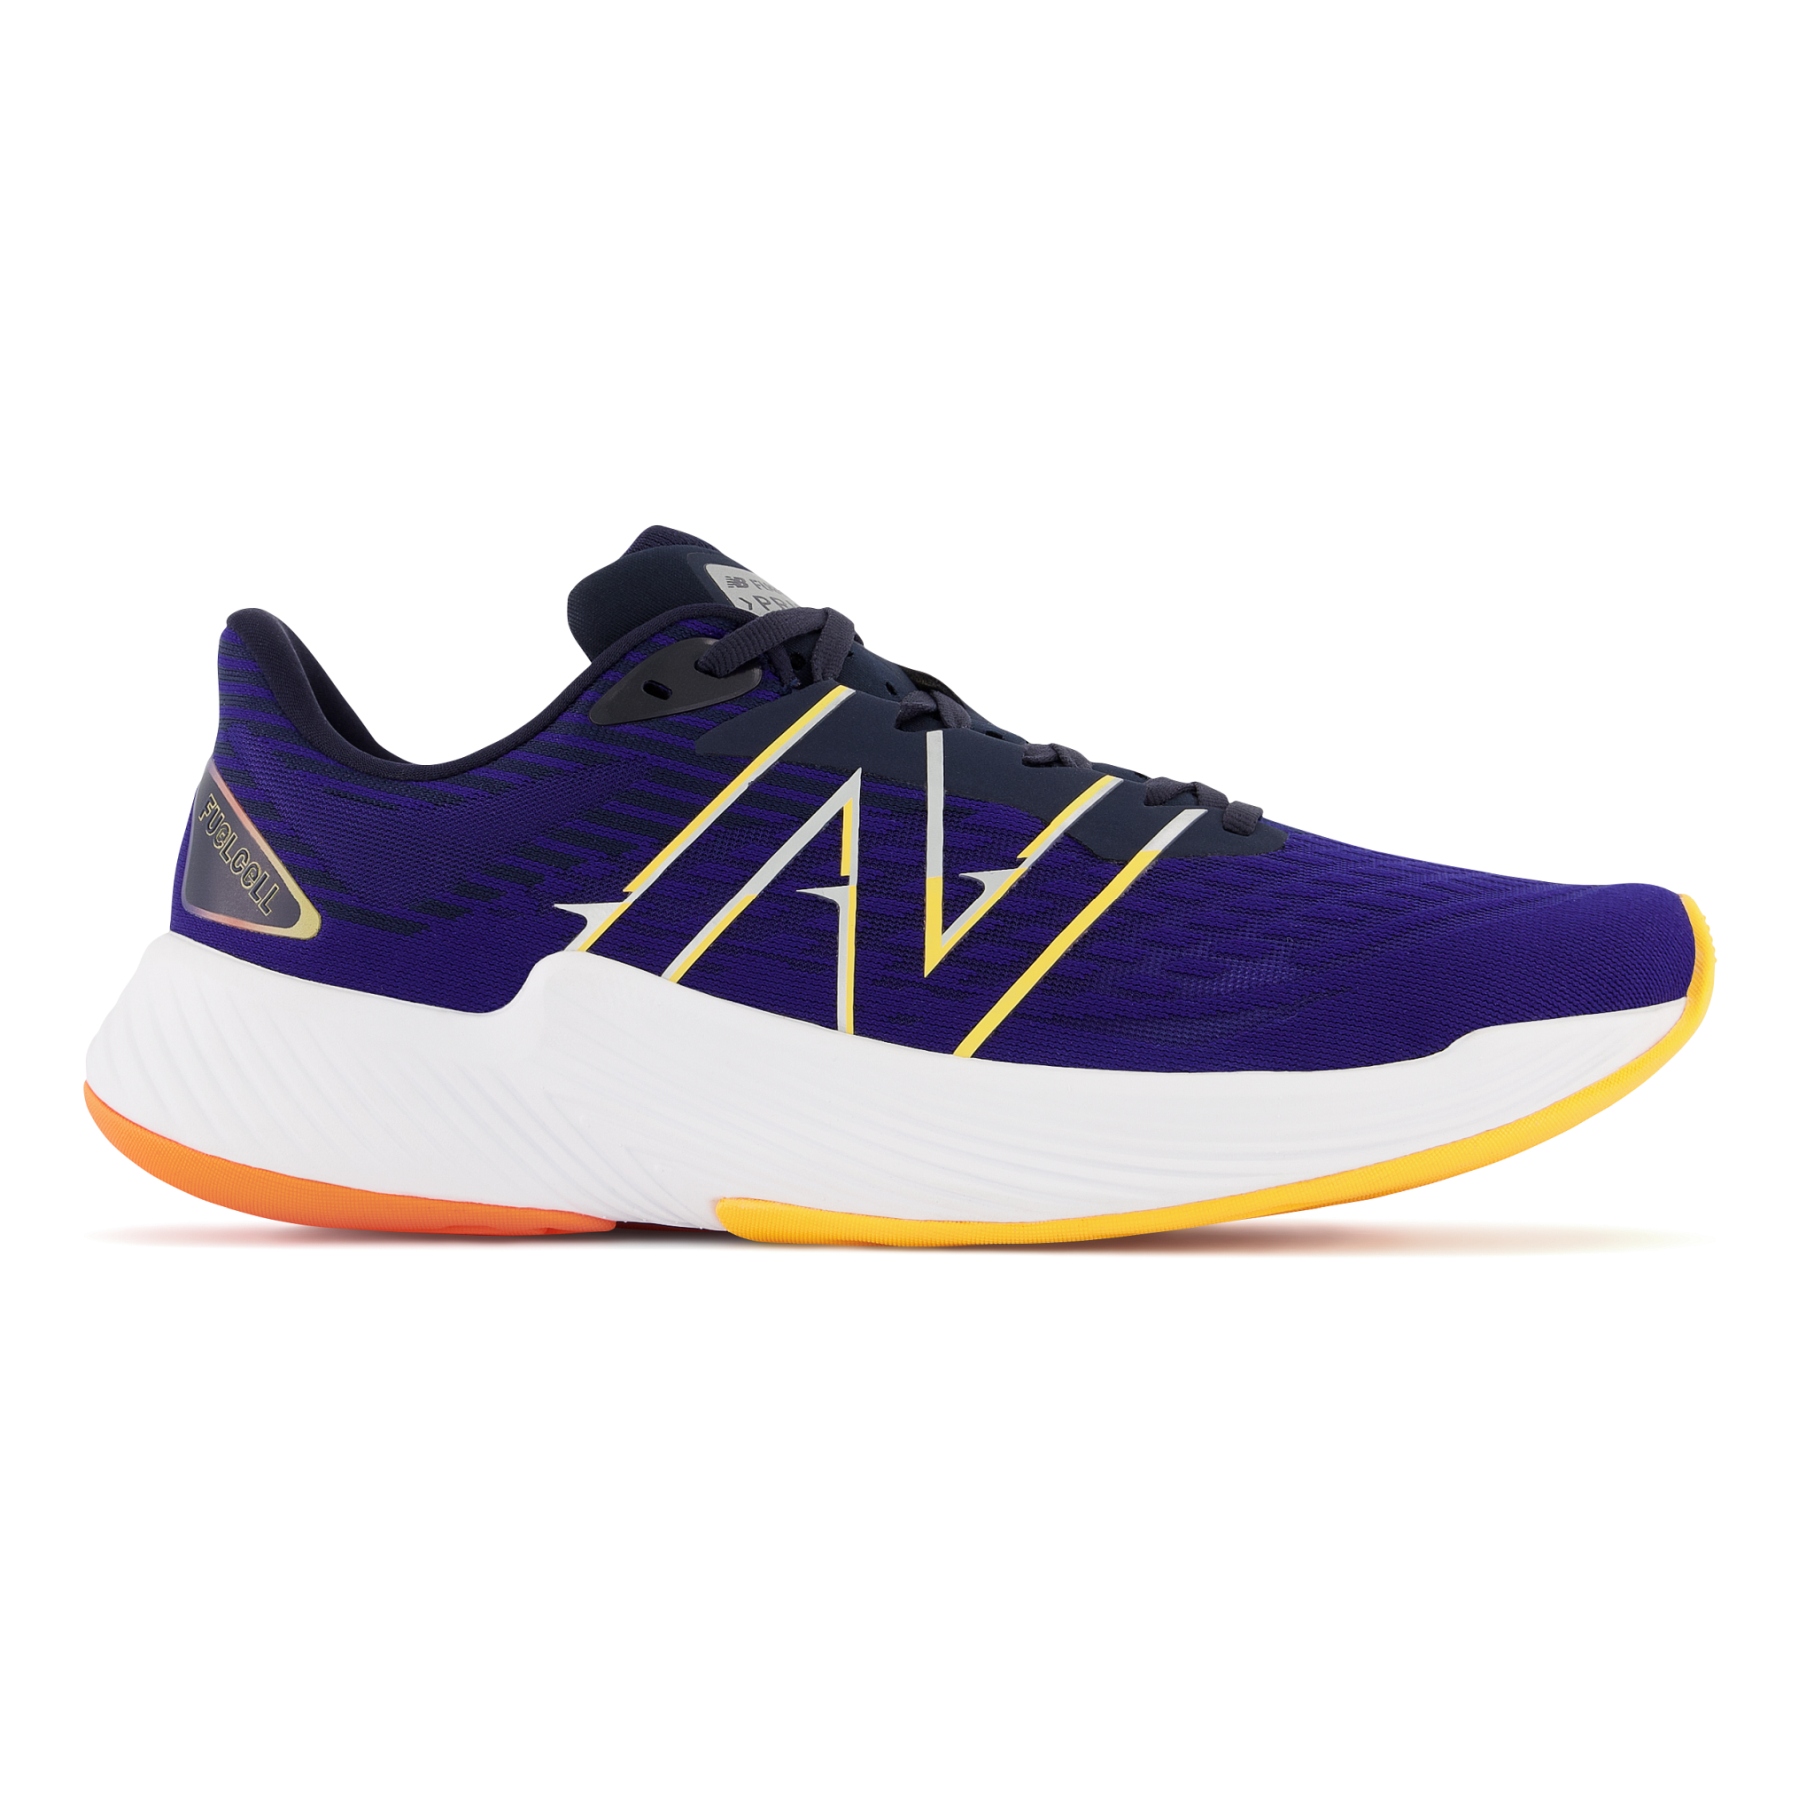 Productfoto van New Balance FuelCell Prism v2 Running Shoes - Navy